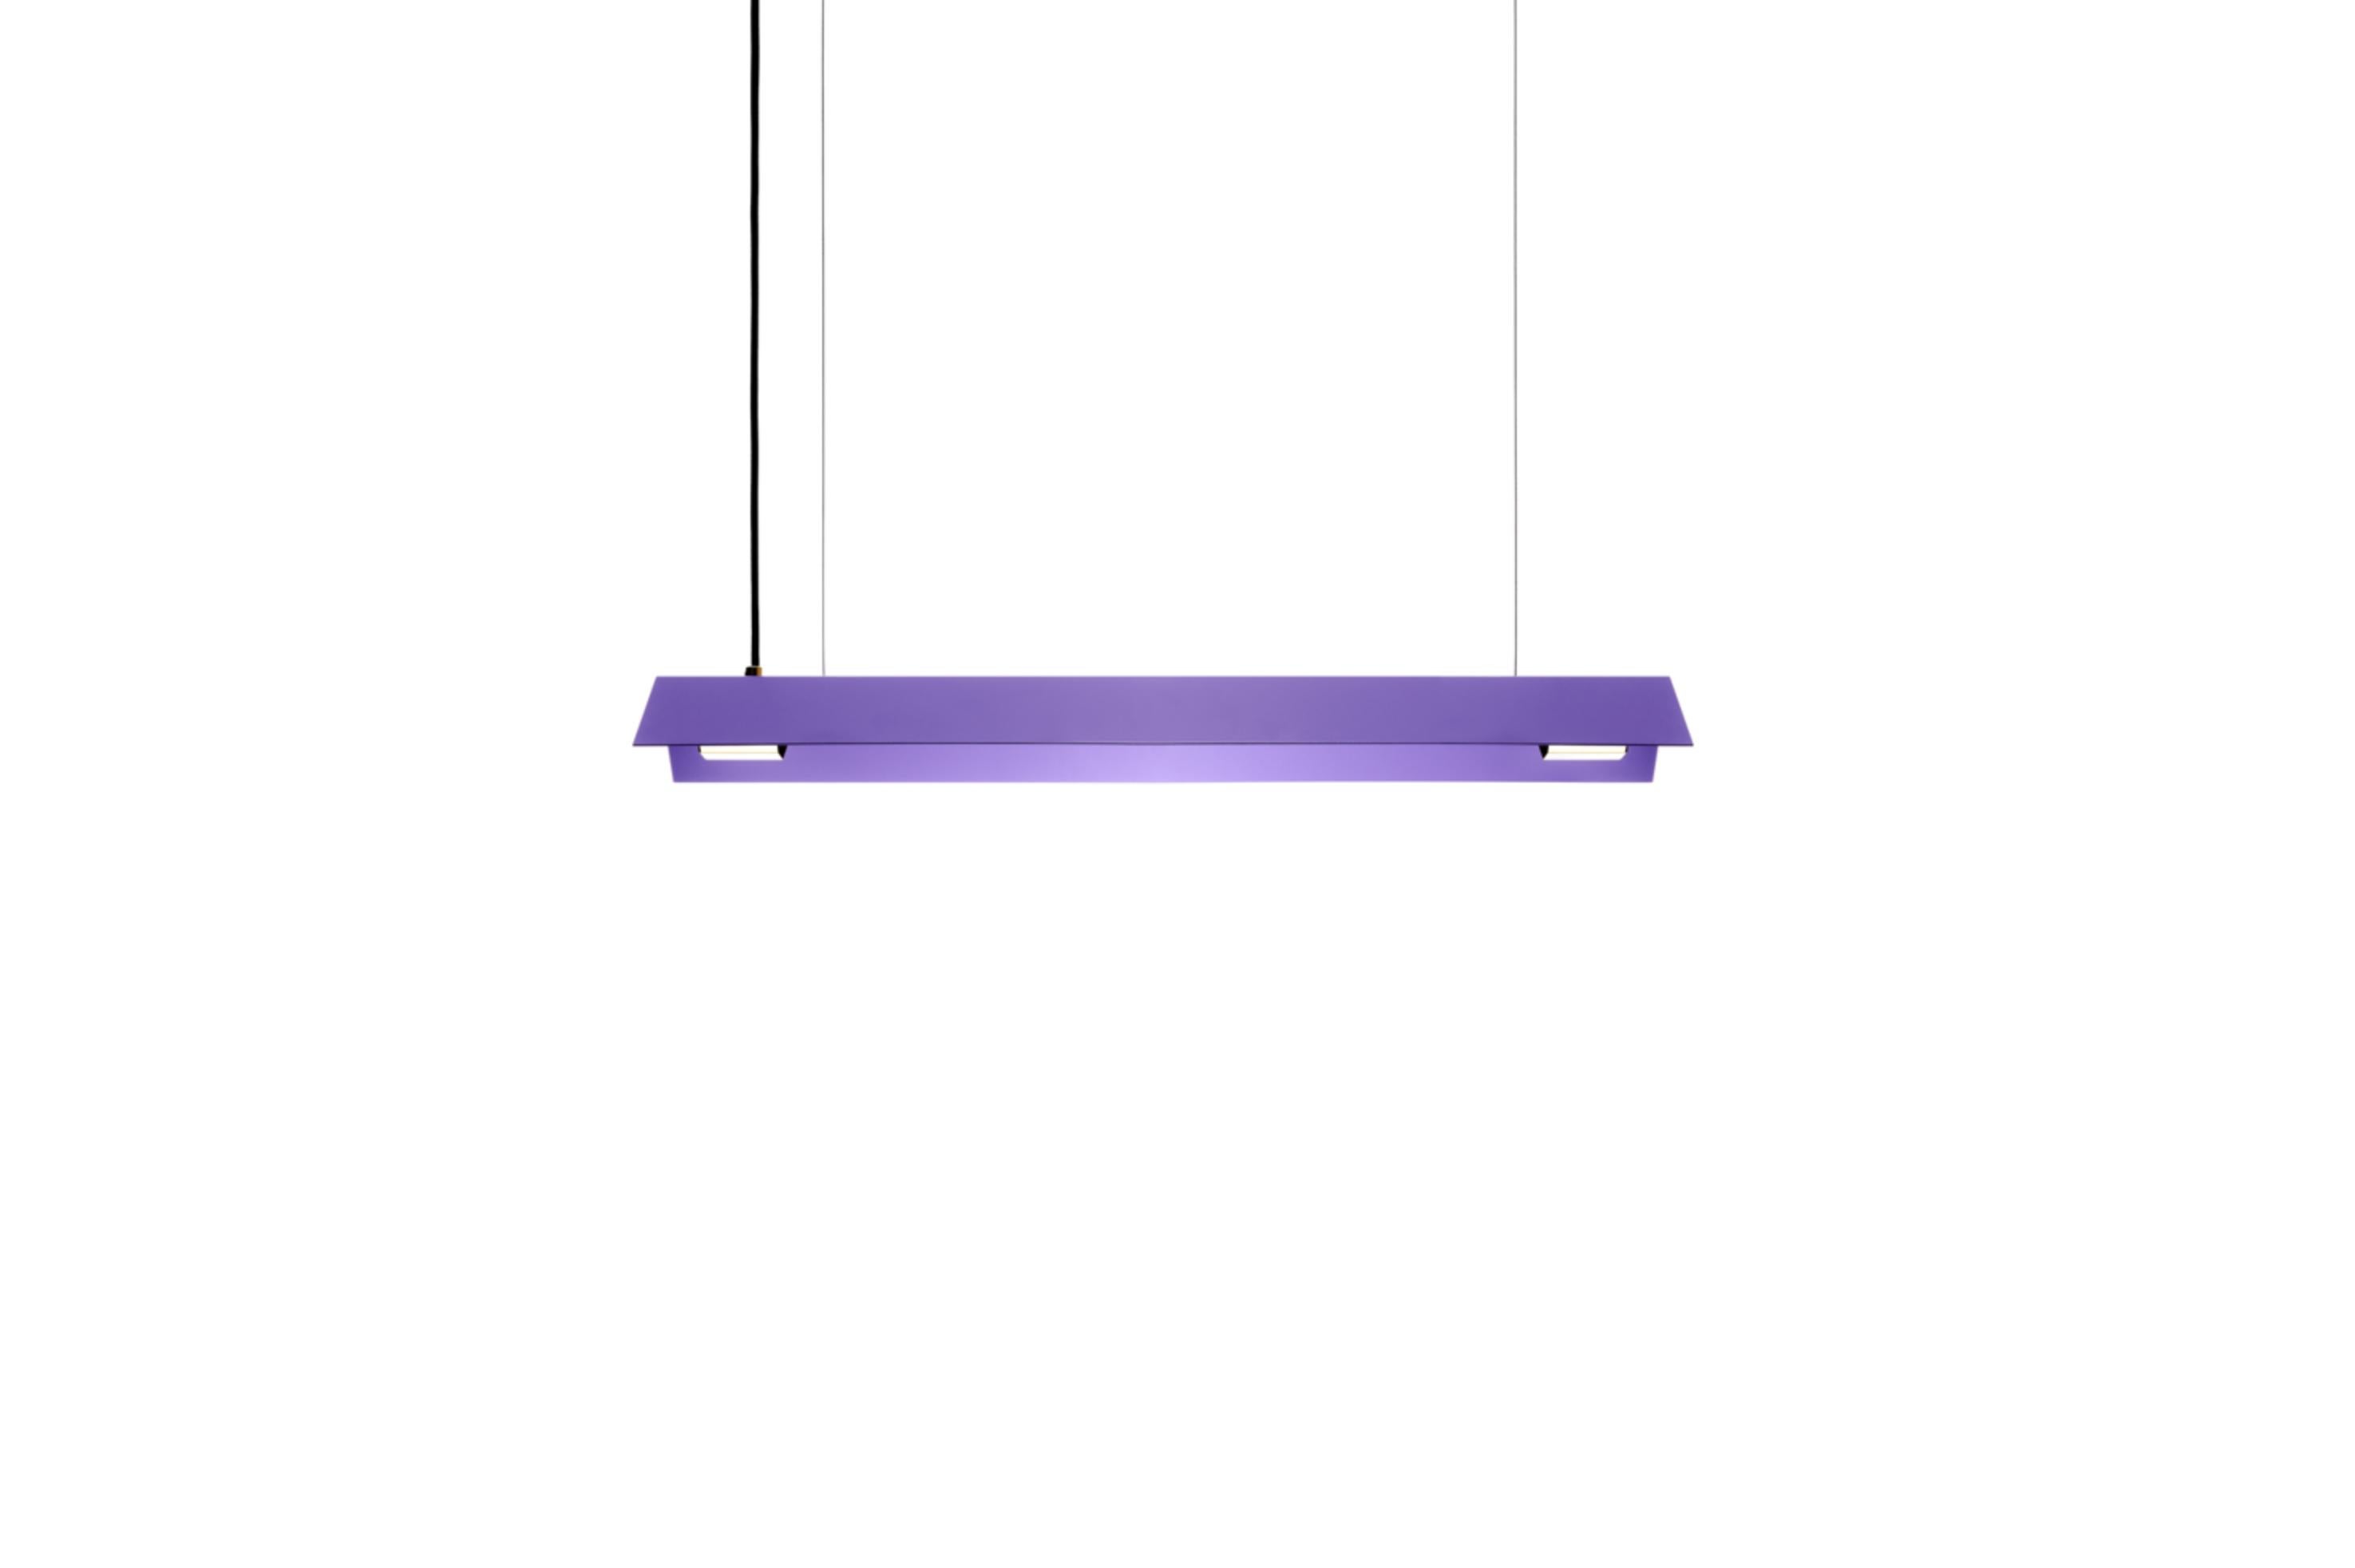 Small Misalliance Ex lavender suspended light by Lexavala
Dimensions: D 16 x W 70 x H 8 cm
Materials: powder coated shade with details made of brass or stainless steel.

There are two lenghts of socket covers, extending over the LED. Two short